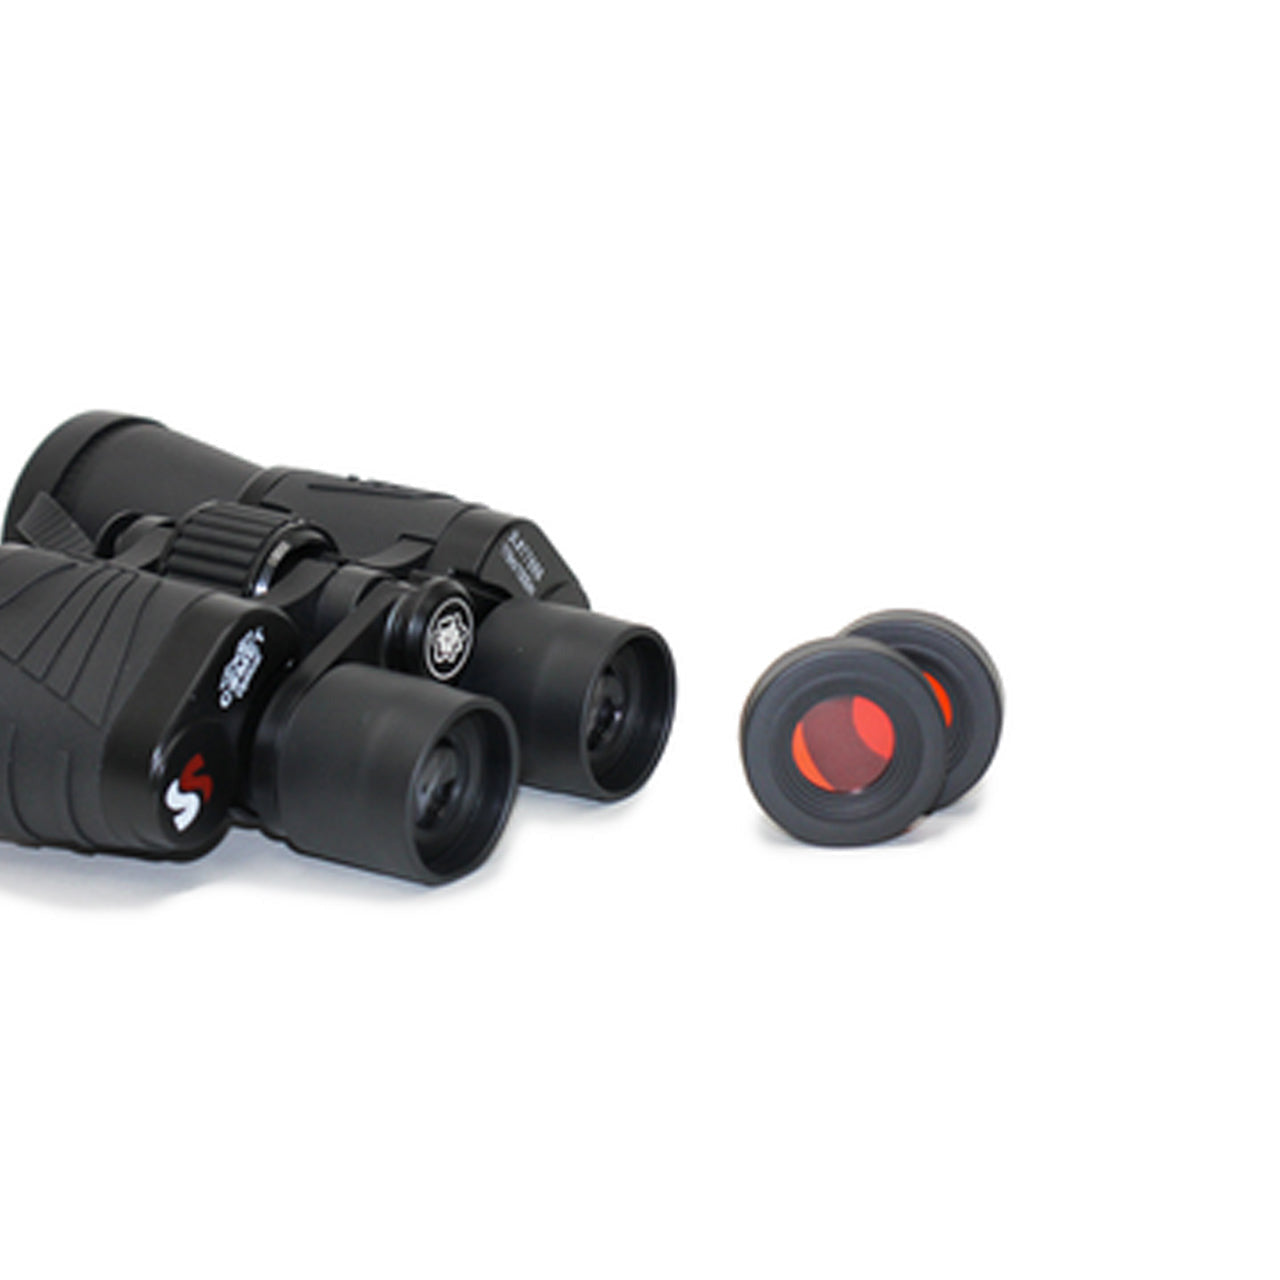 These 7x50 binoculars come in black and are built with a lightweight, ergonomic design. These binoculars are perfect for those looking for extremely versatile, high quality, and economically priced optics. www.defenceqstore.com.au